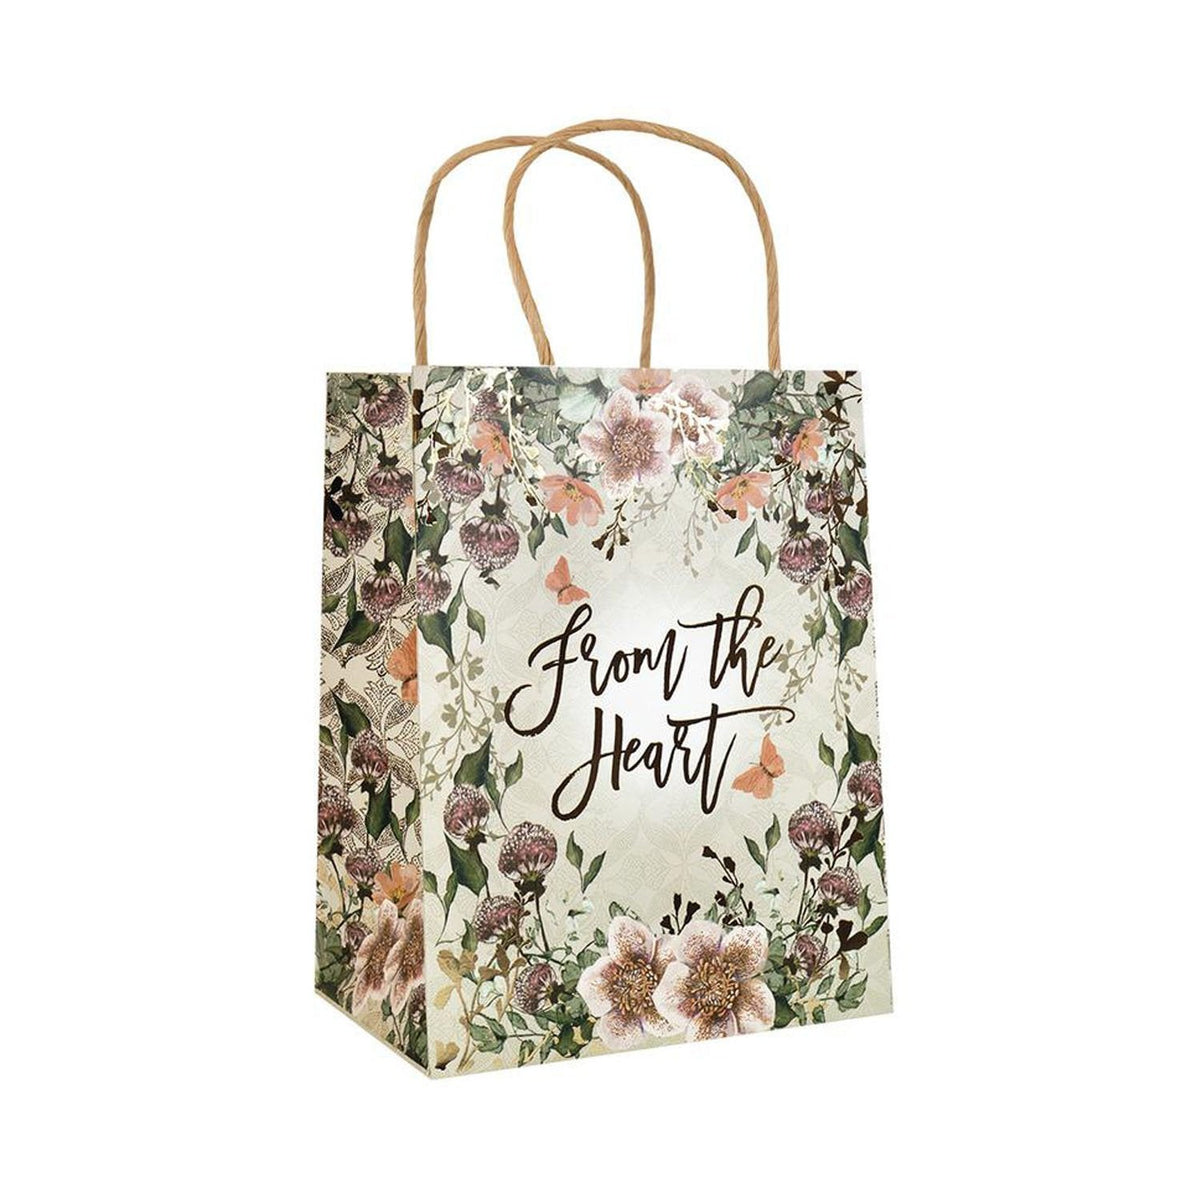 From the Heart Floral Gift Bag - Gift Bags